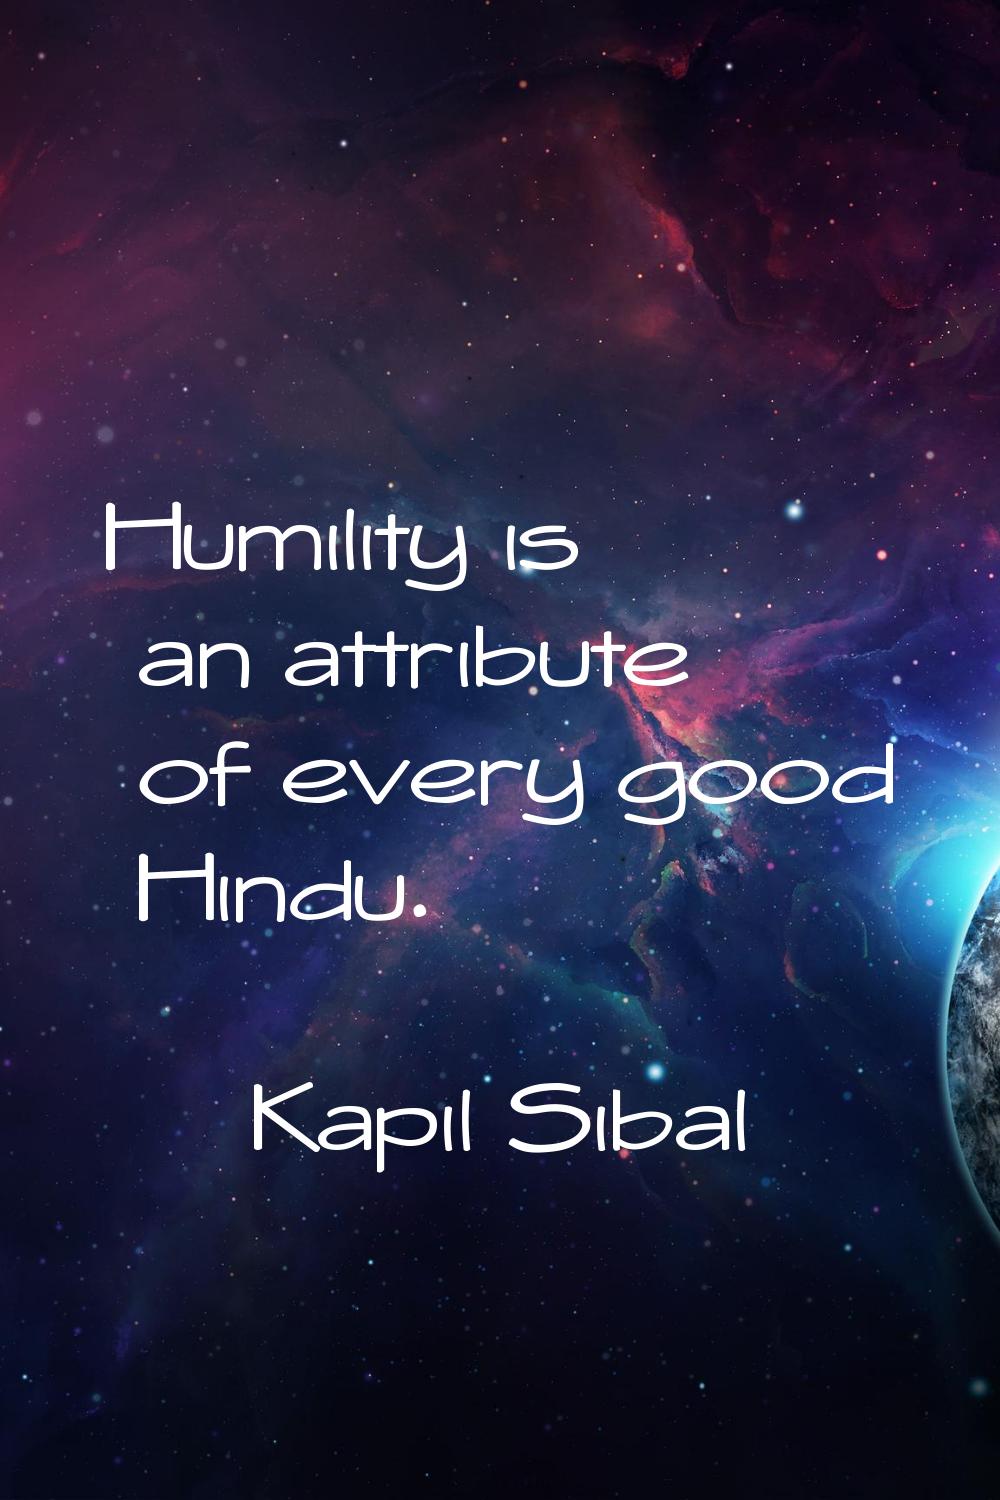 Humility is an attribute of every good Hindu.